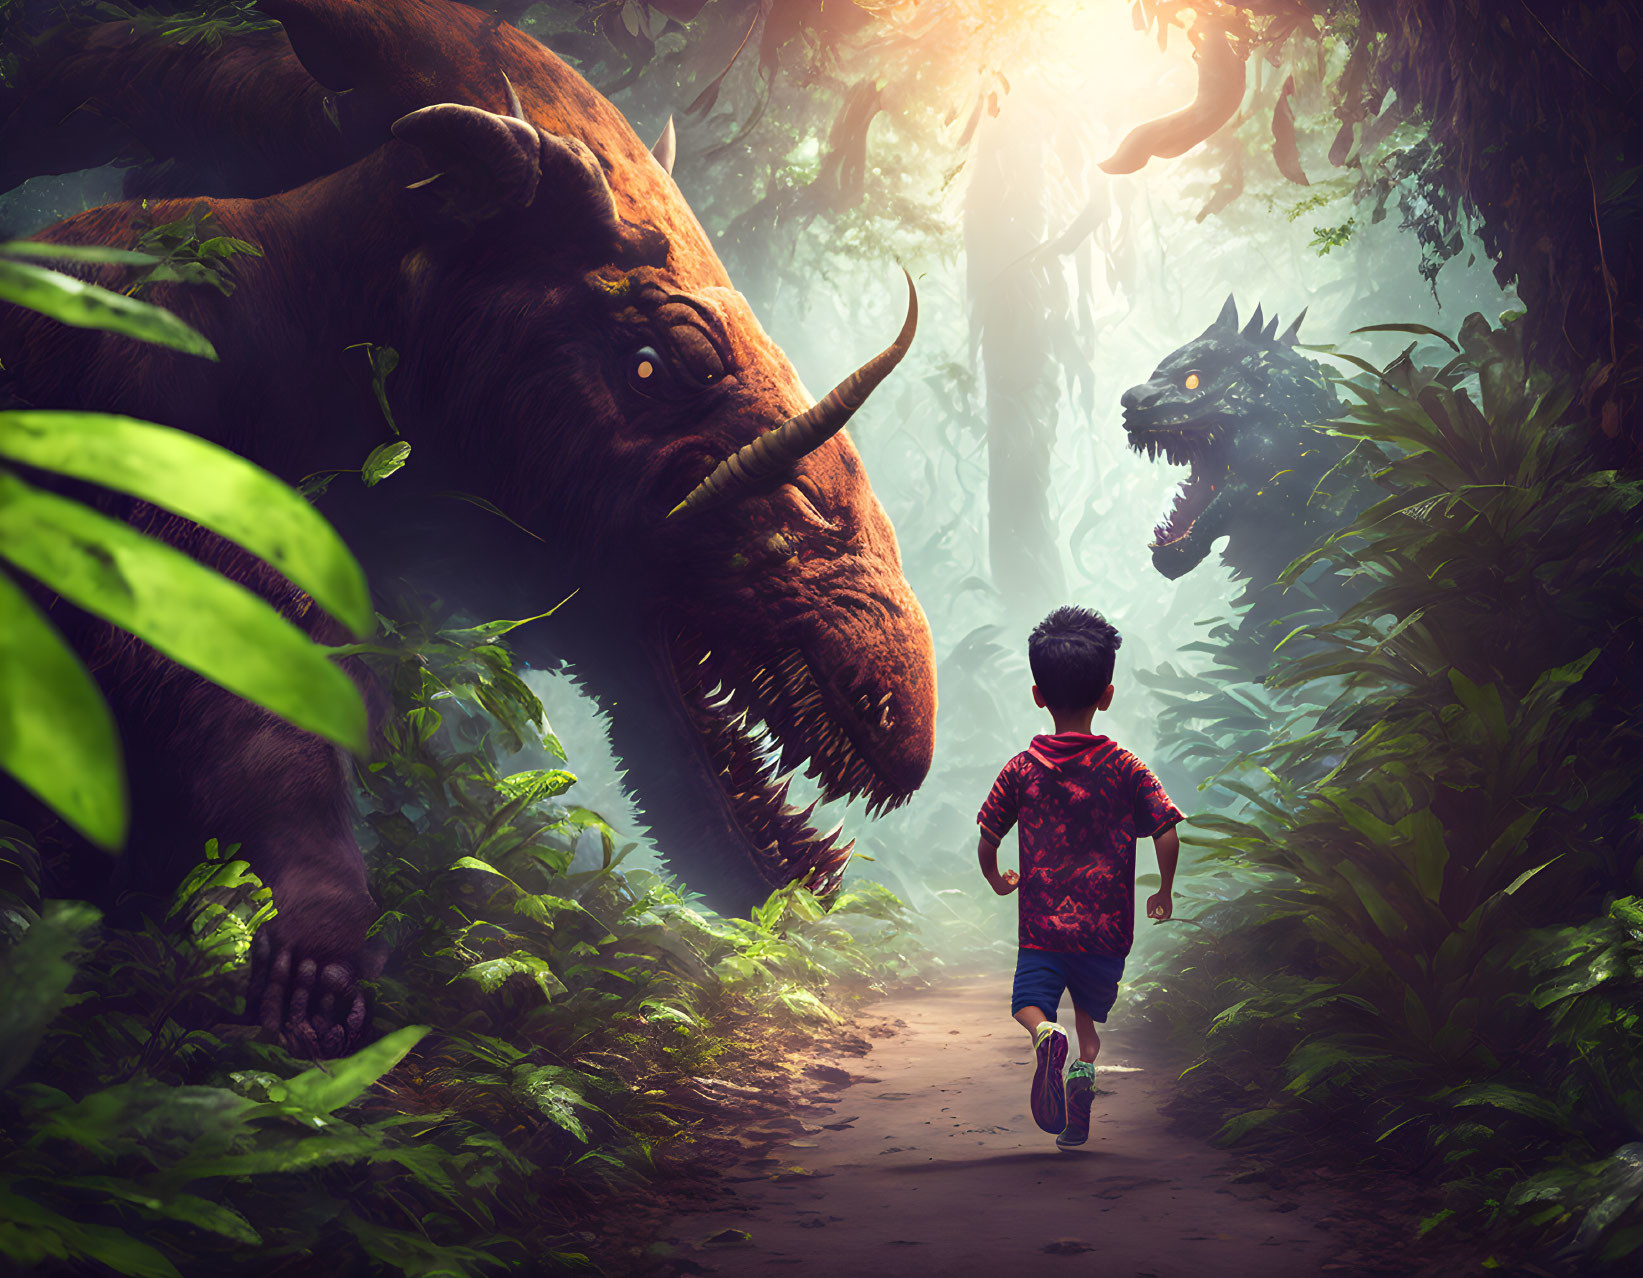 Young boy chased by massive dinosaurs in lush forest